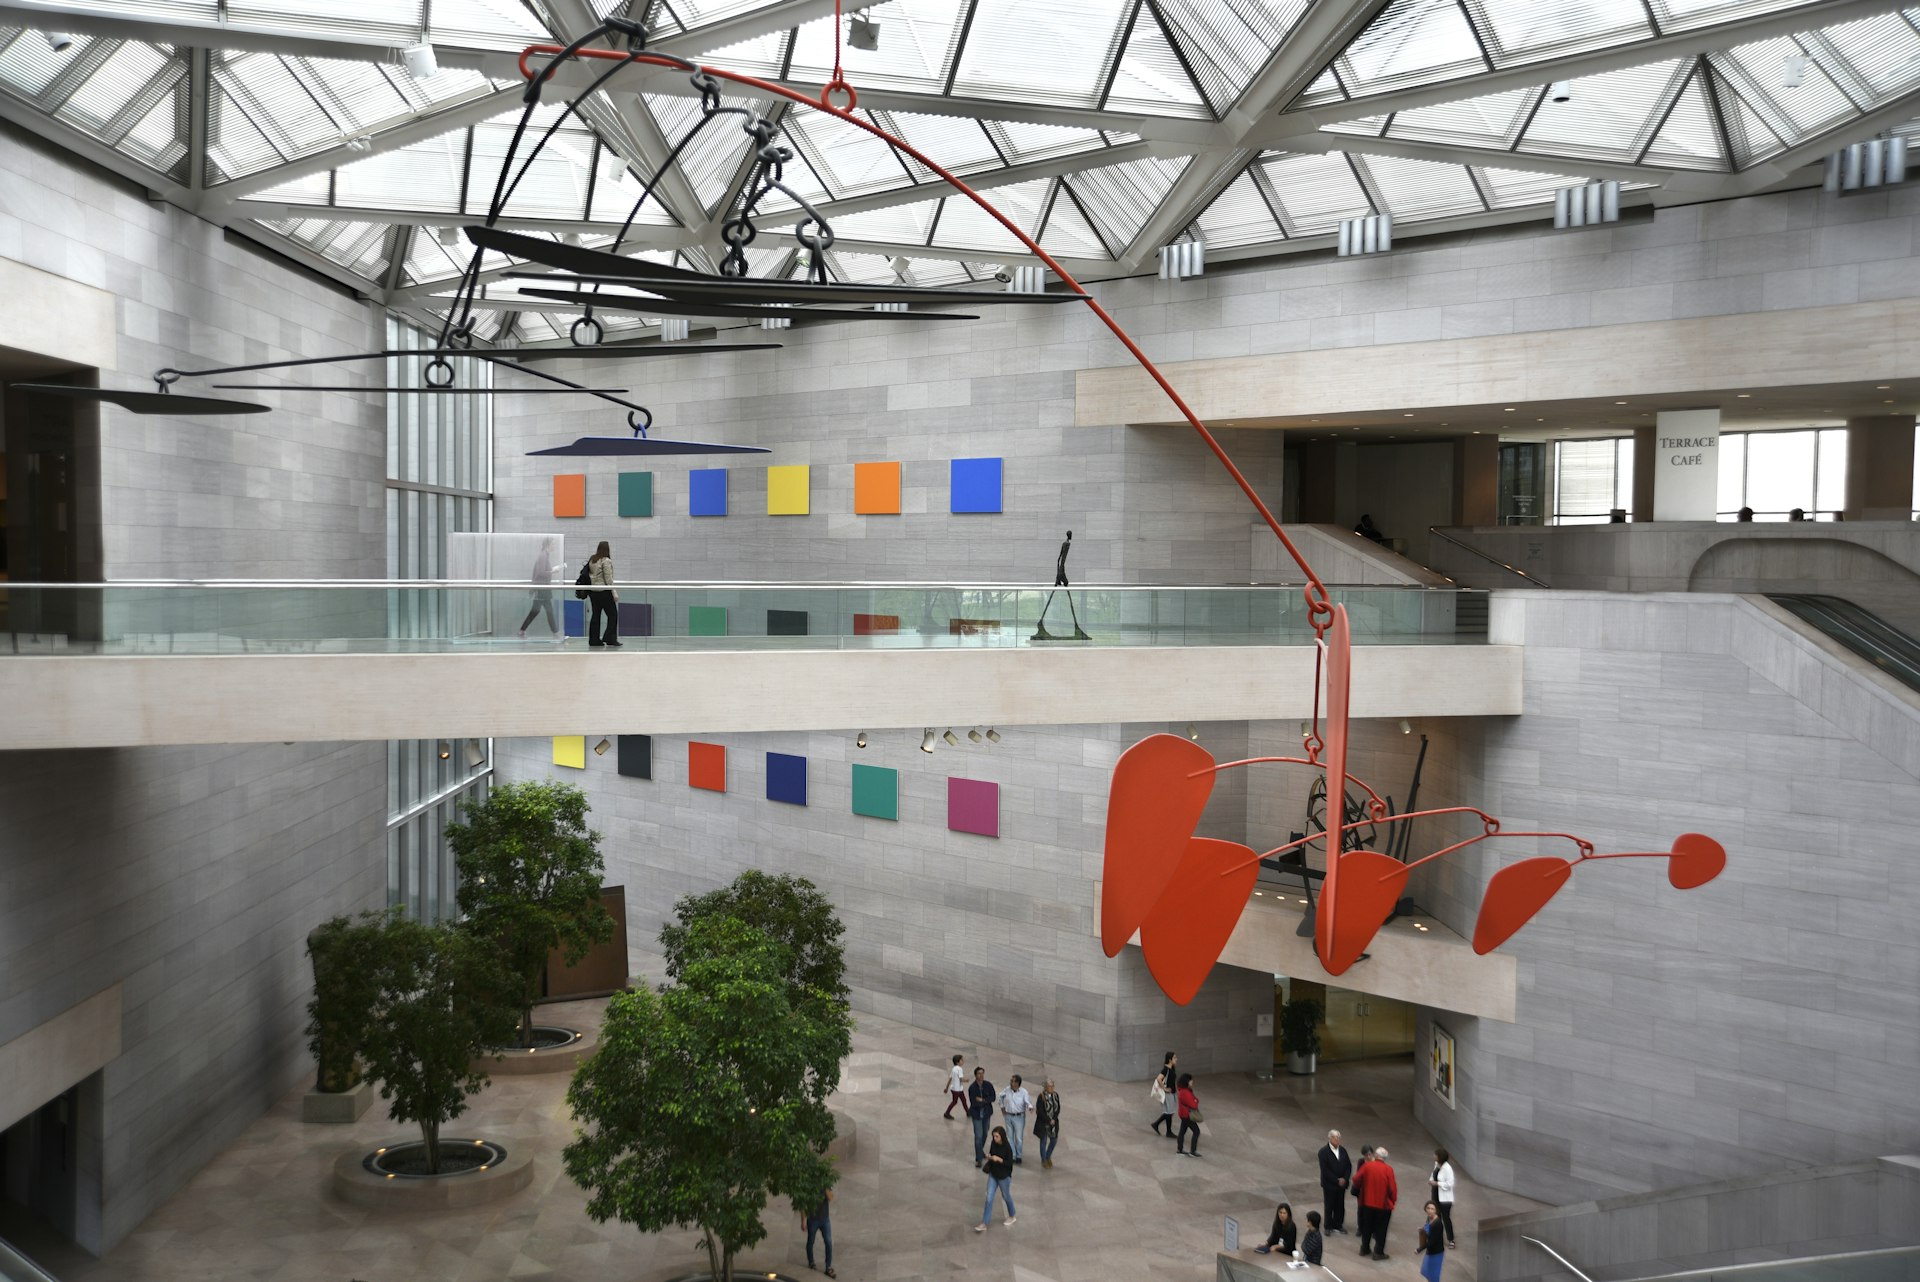 Alexander Calder’s untitled aluminum-and-steel mobile hangs from the ceiling above visitors at the National Gallery of Art’s East Building on the National Mall in Washington, DC, USA